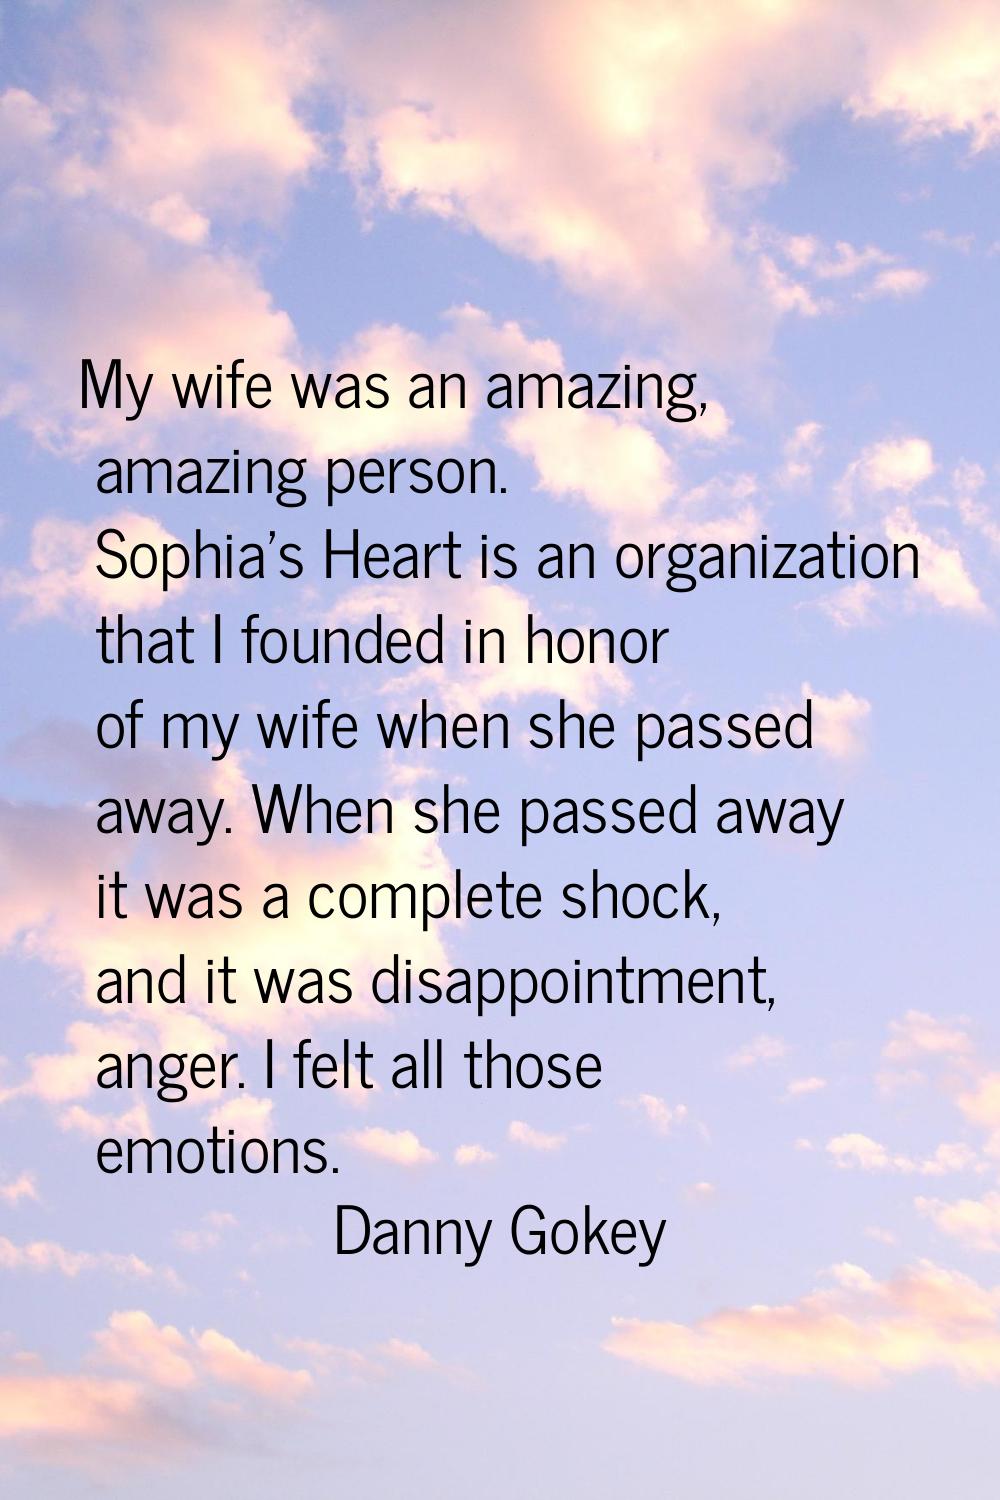 My wife was an amazing, amazing person. Sophia's Heart is an organization that I founded in honor o